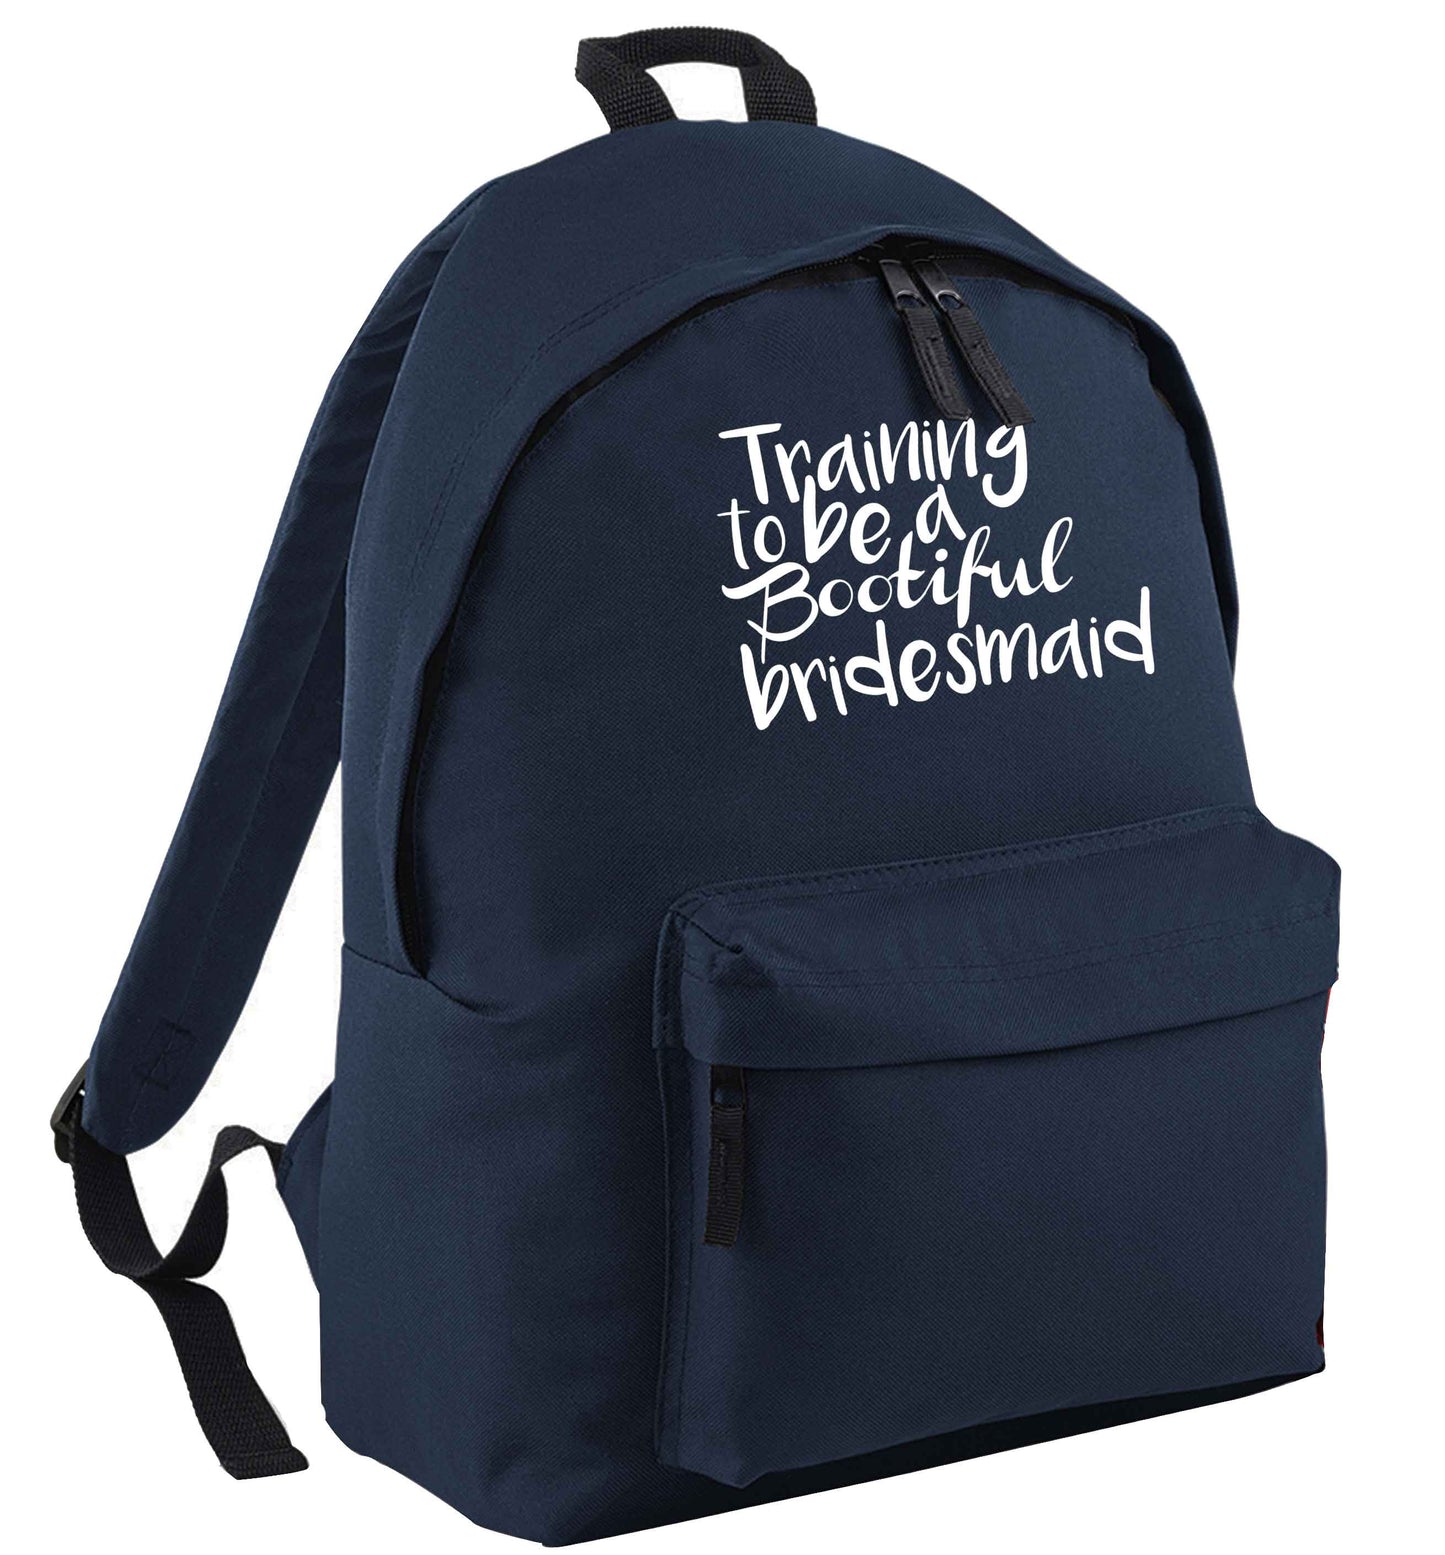 Get motivated and get fit for your big day! Our workout quotes and designs will get you ready to sweat! Perfect for any bride, groom or bridesmaid to be!  navy adults backpack